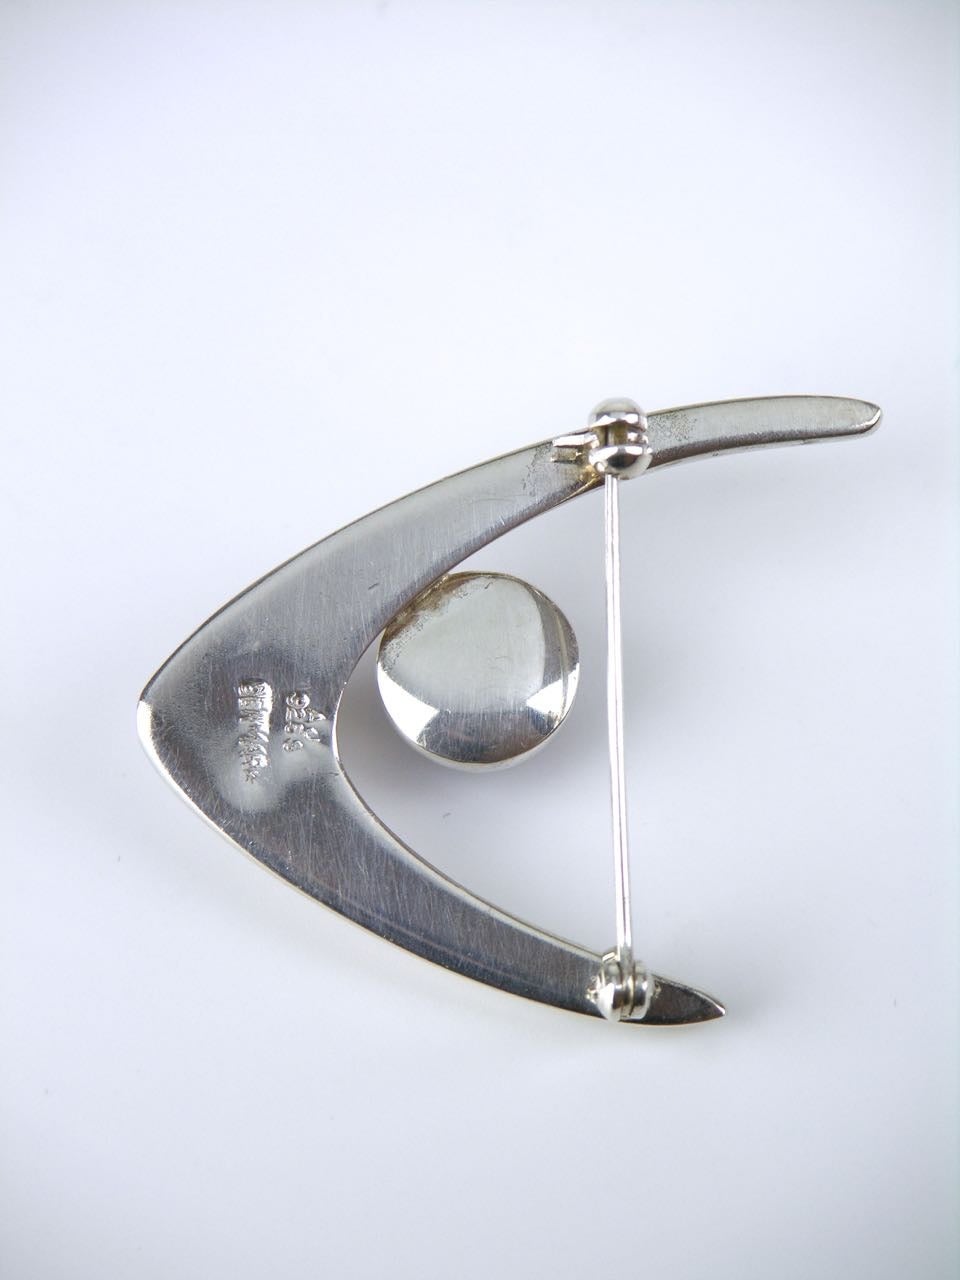 A solid silver and cabochon amethyst wishbone motif brooch consisting of a wishbone shape with a cabochon amethyst bezel set and suspended in between the arms fitted with with a rollover safety clasp to the pin on the reverse.

- marked AJ for